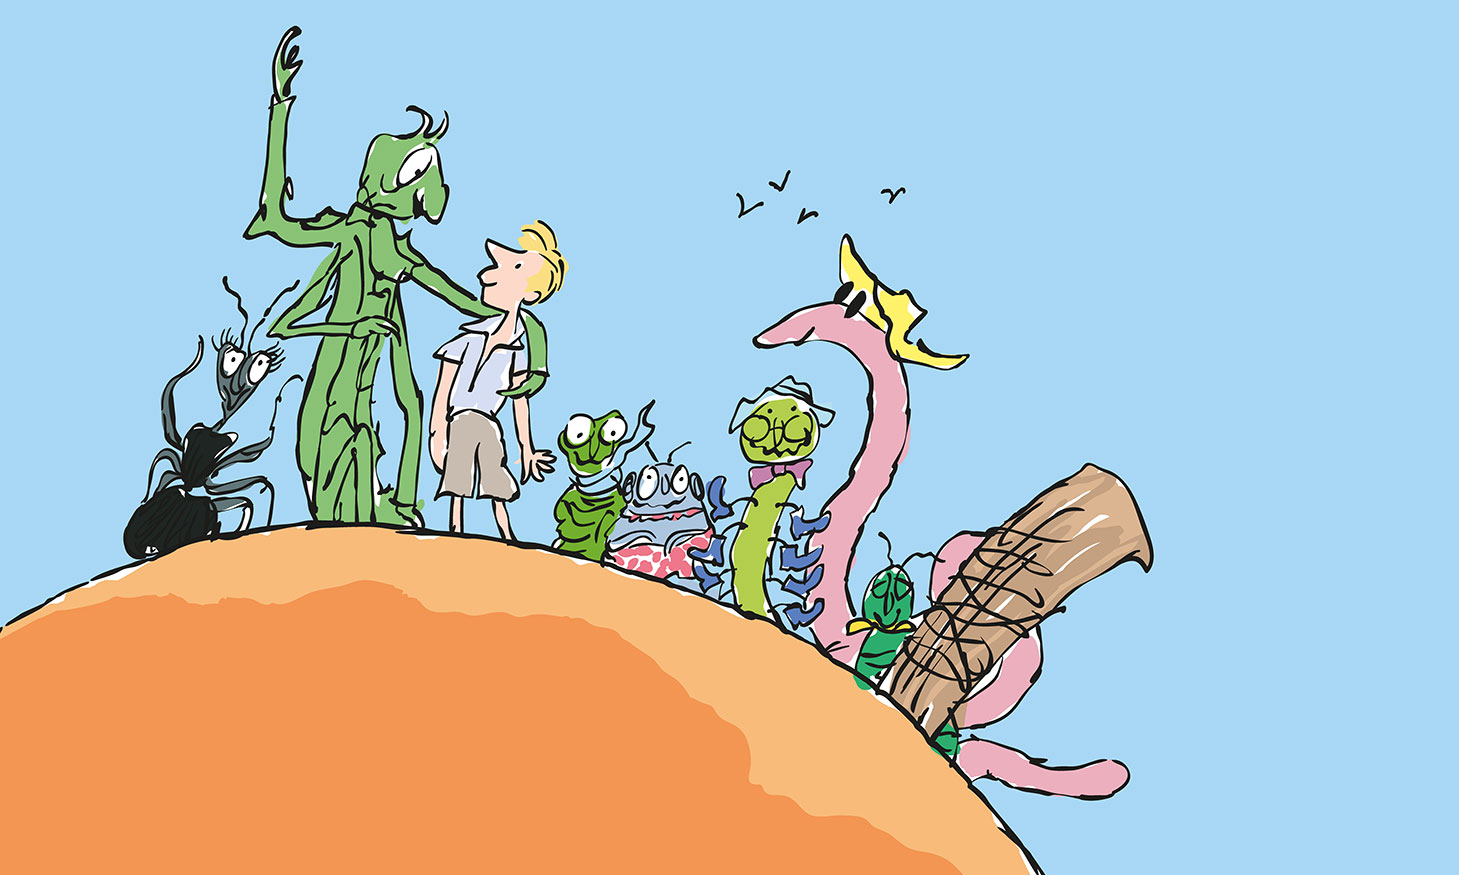 Illustration of Roald Dahls James And The Giant Peach